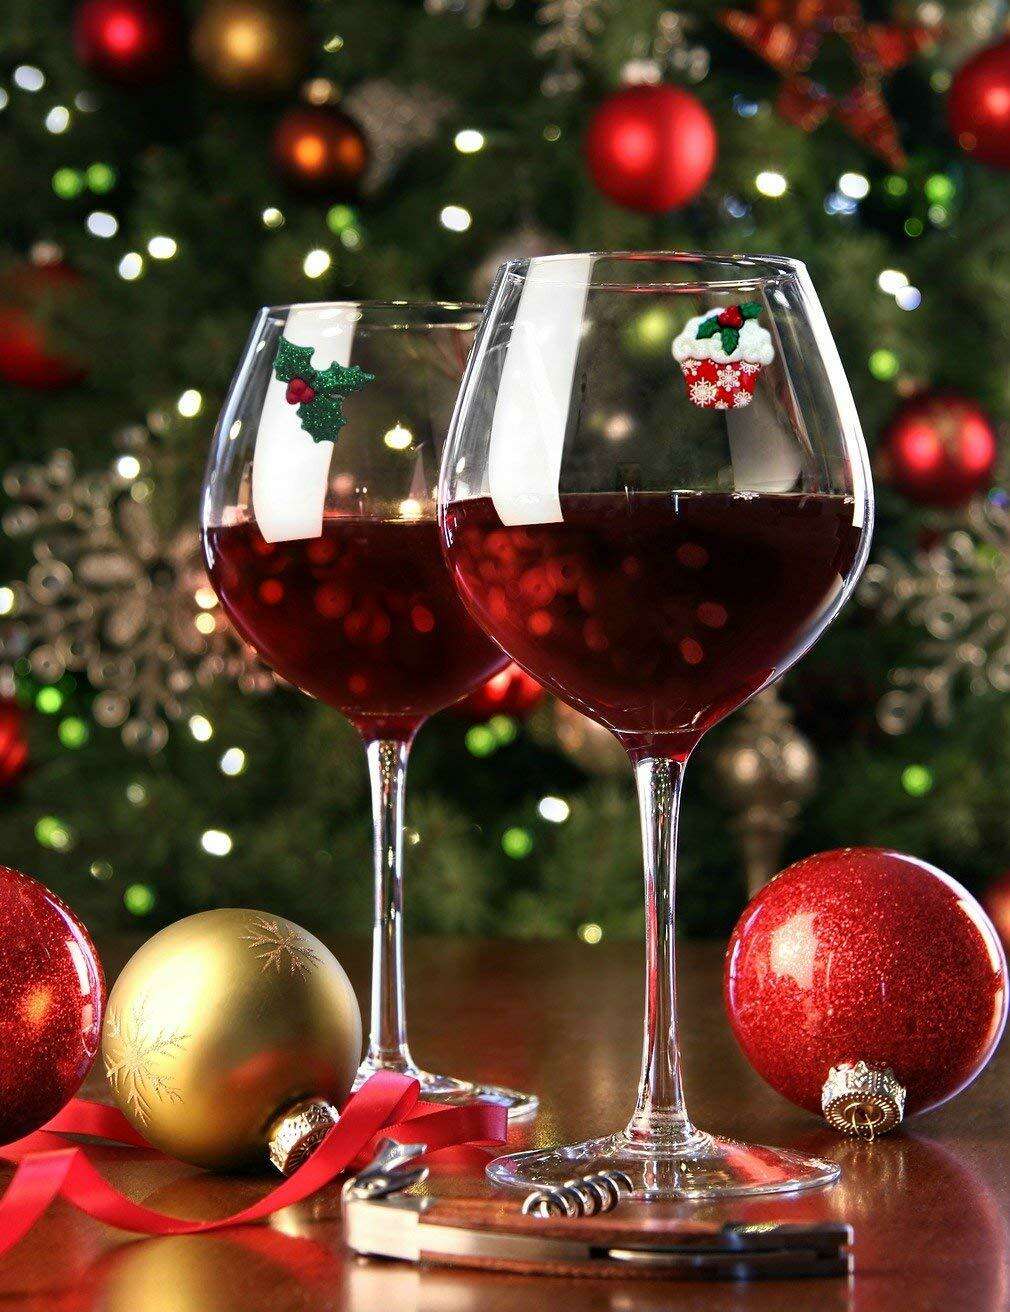 Merry Christmas and Happy Holidays from The Village Winemaker!